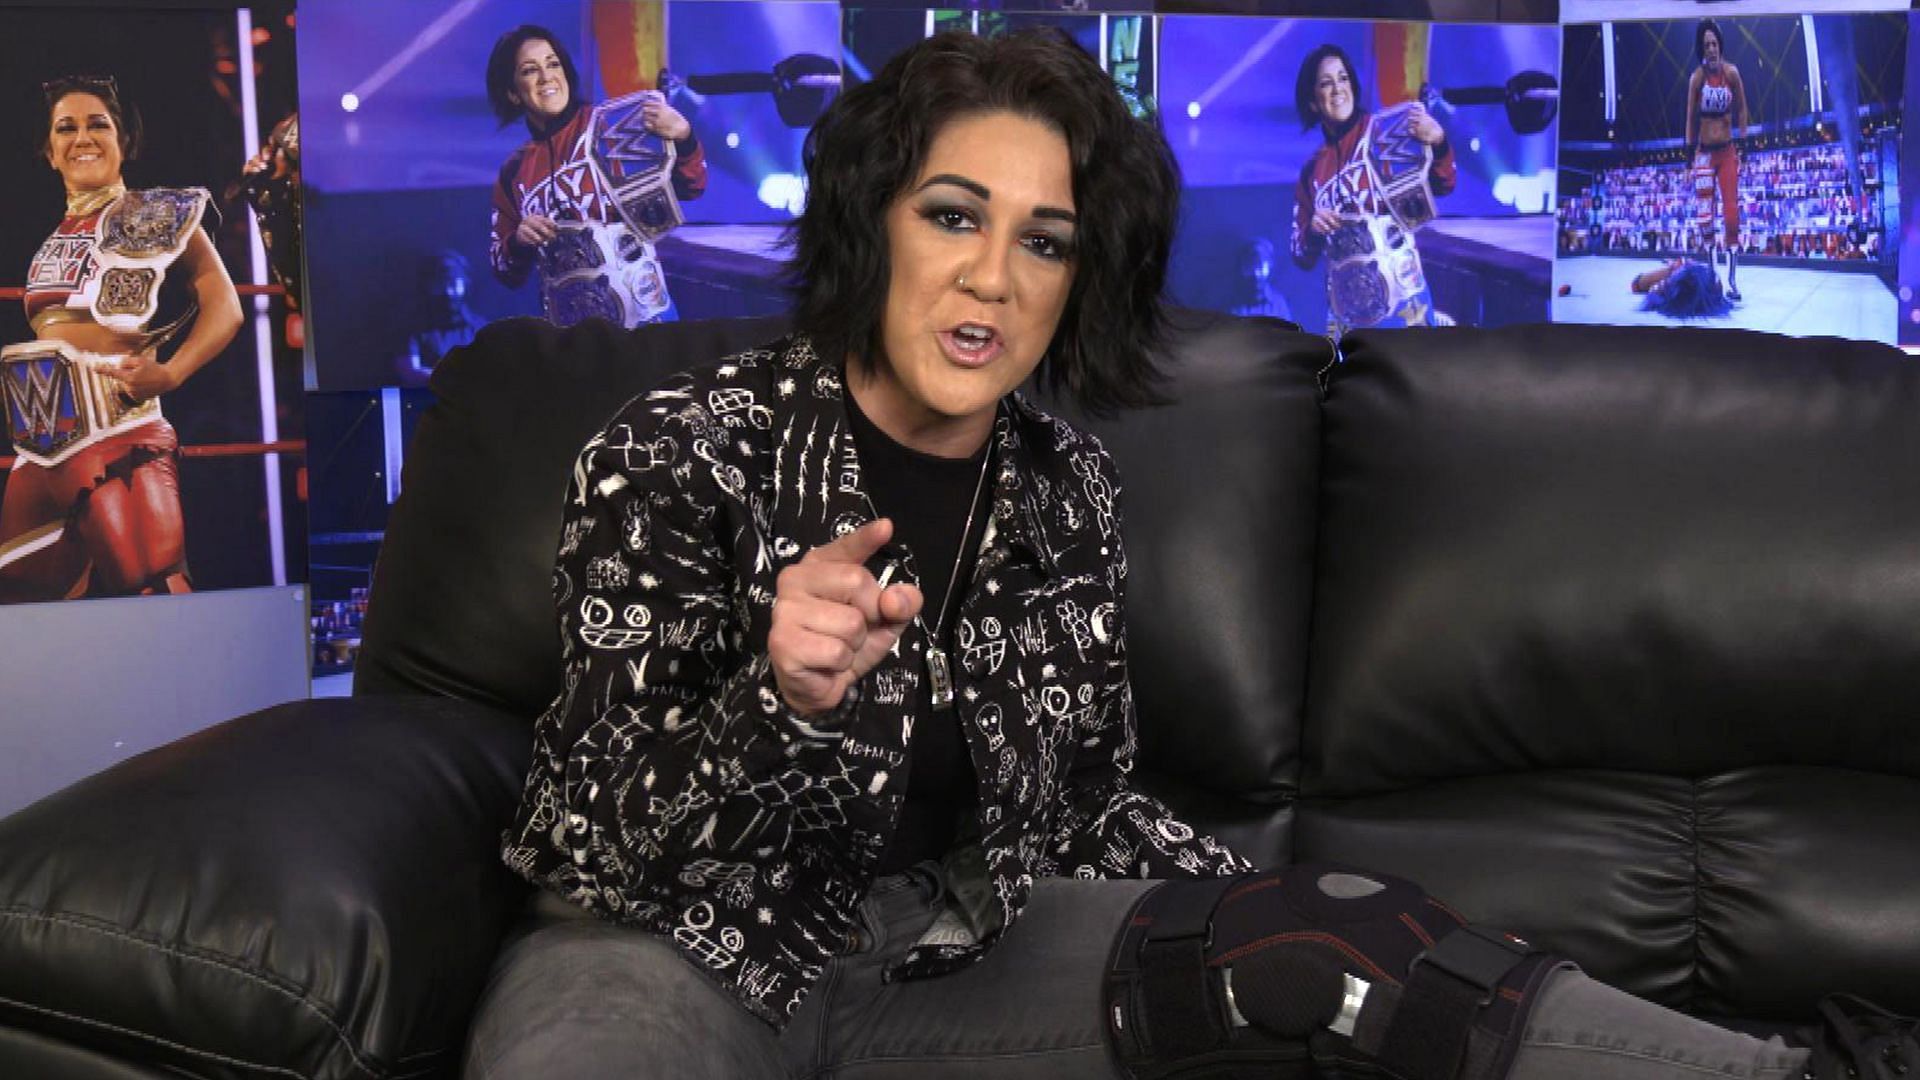 Bayley hints at Four Horsewomen vs. WWE Hall of Famers match